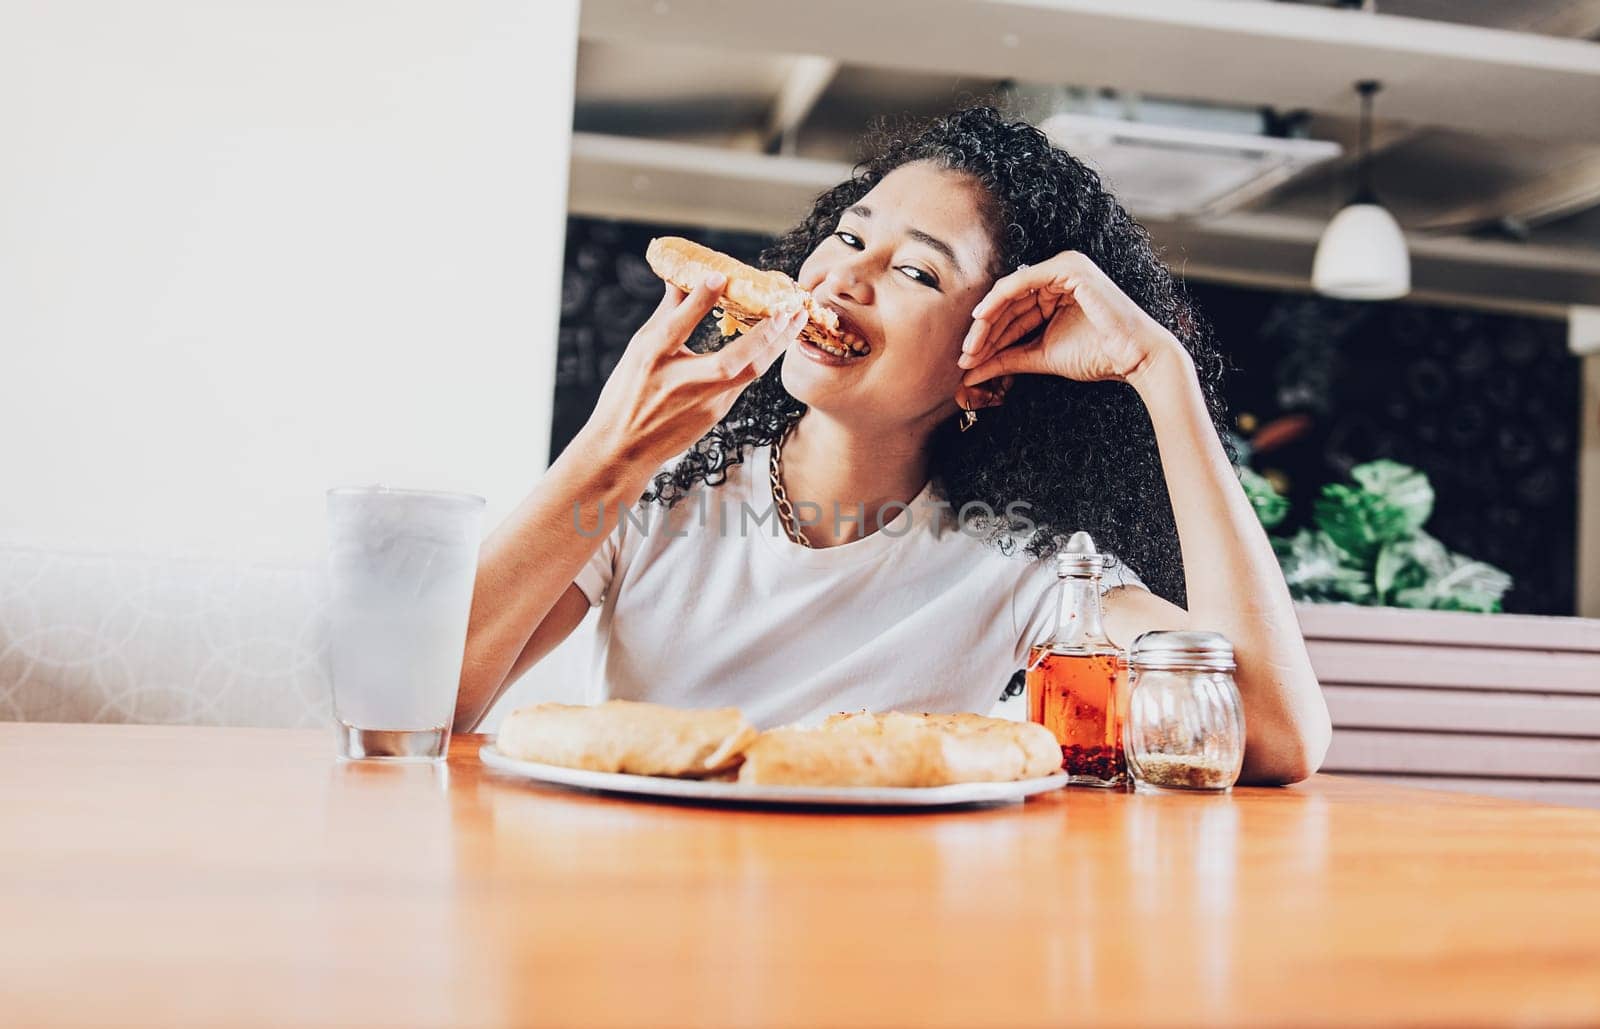 Smiling afro-haired woman enjoying a pizza in a restaurant. Happy afro hair woman eating pizza in a restaurant